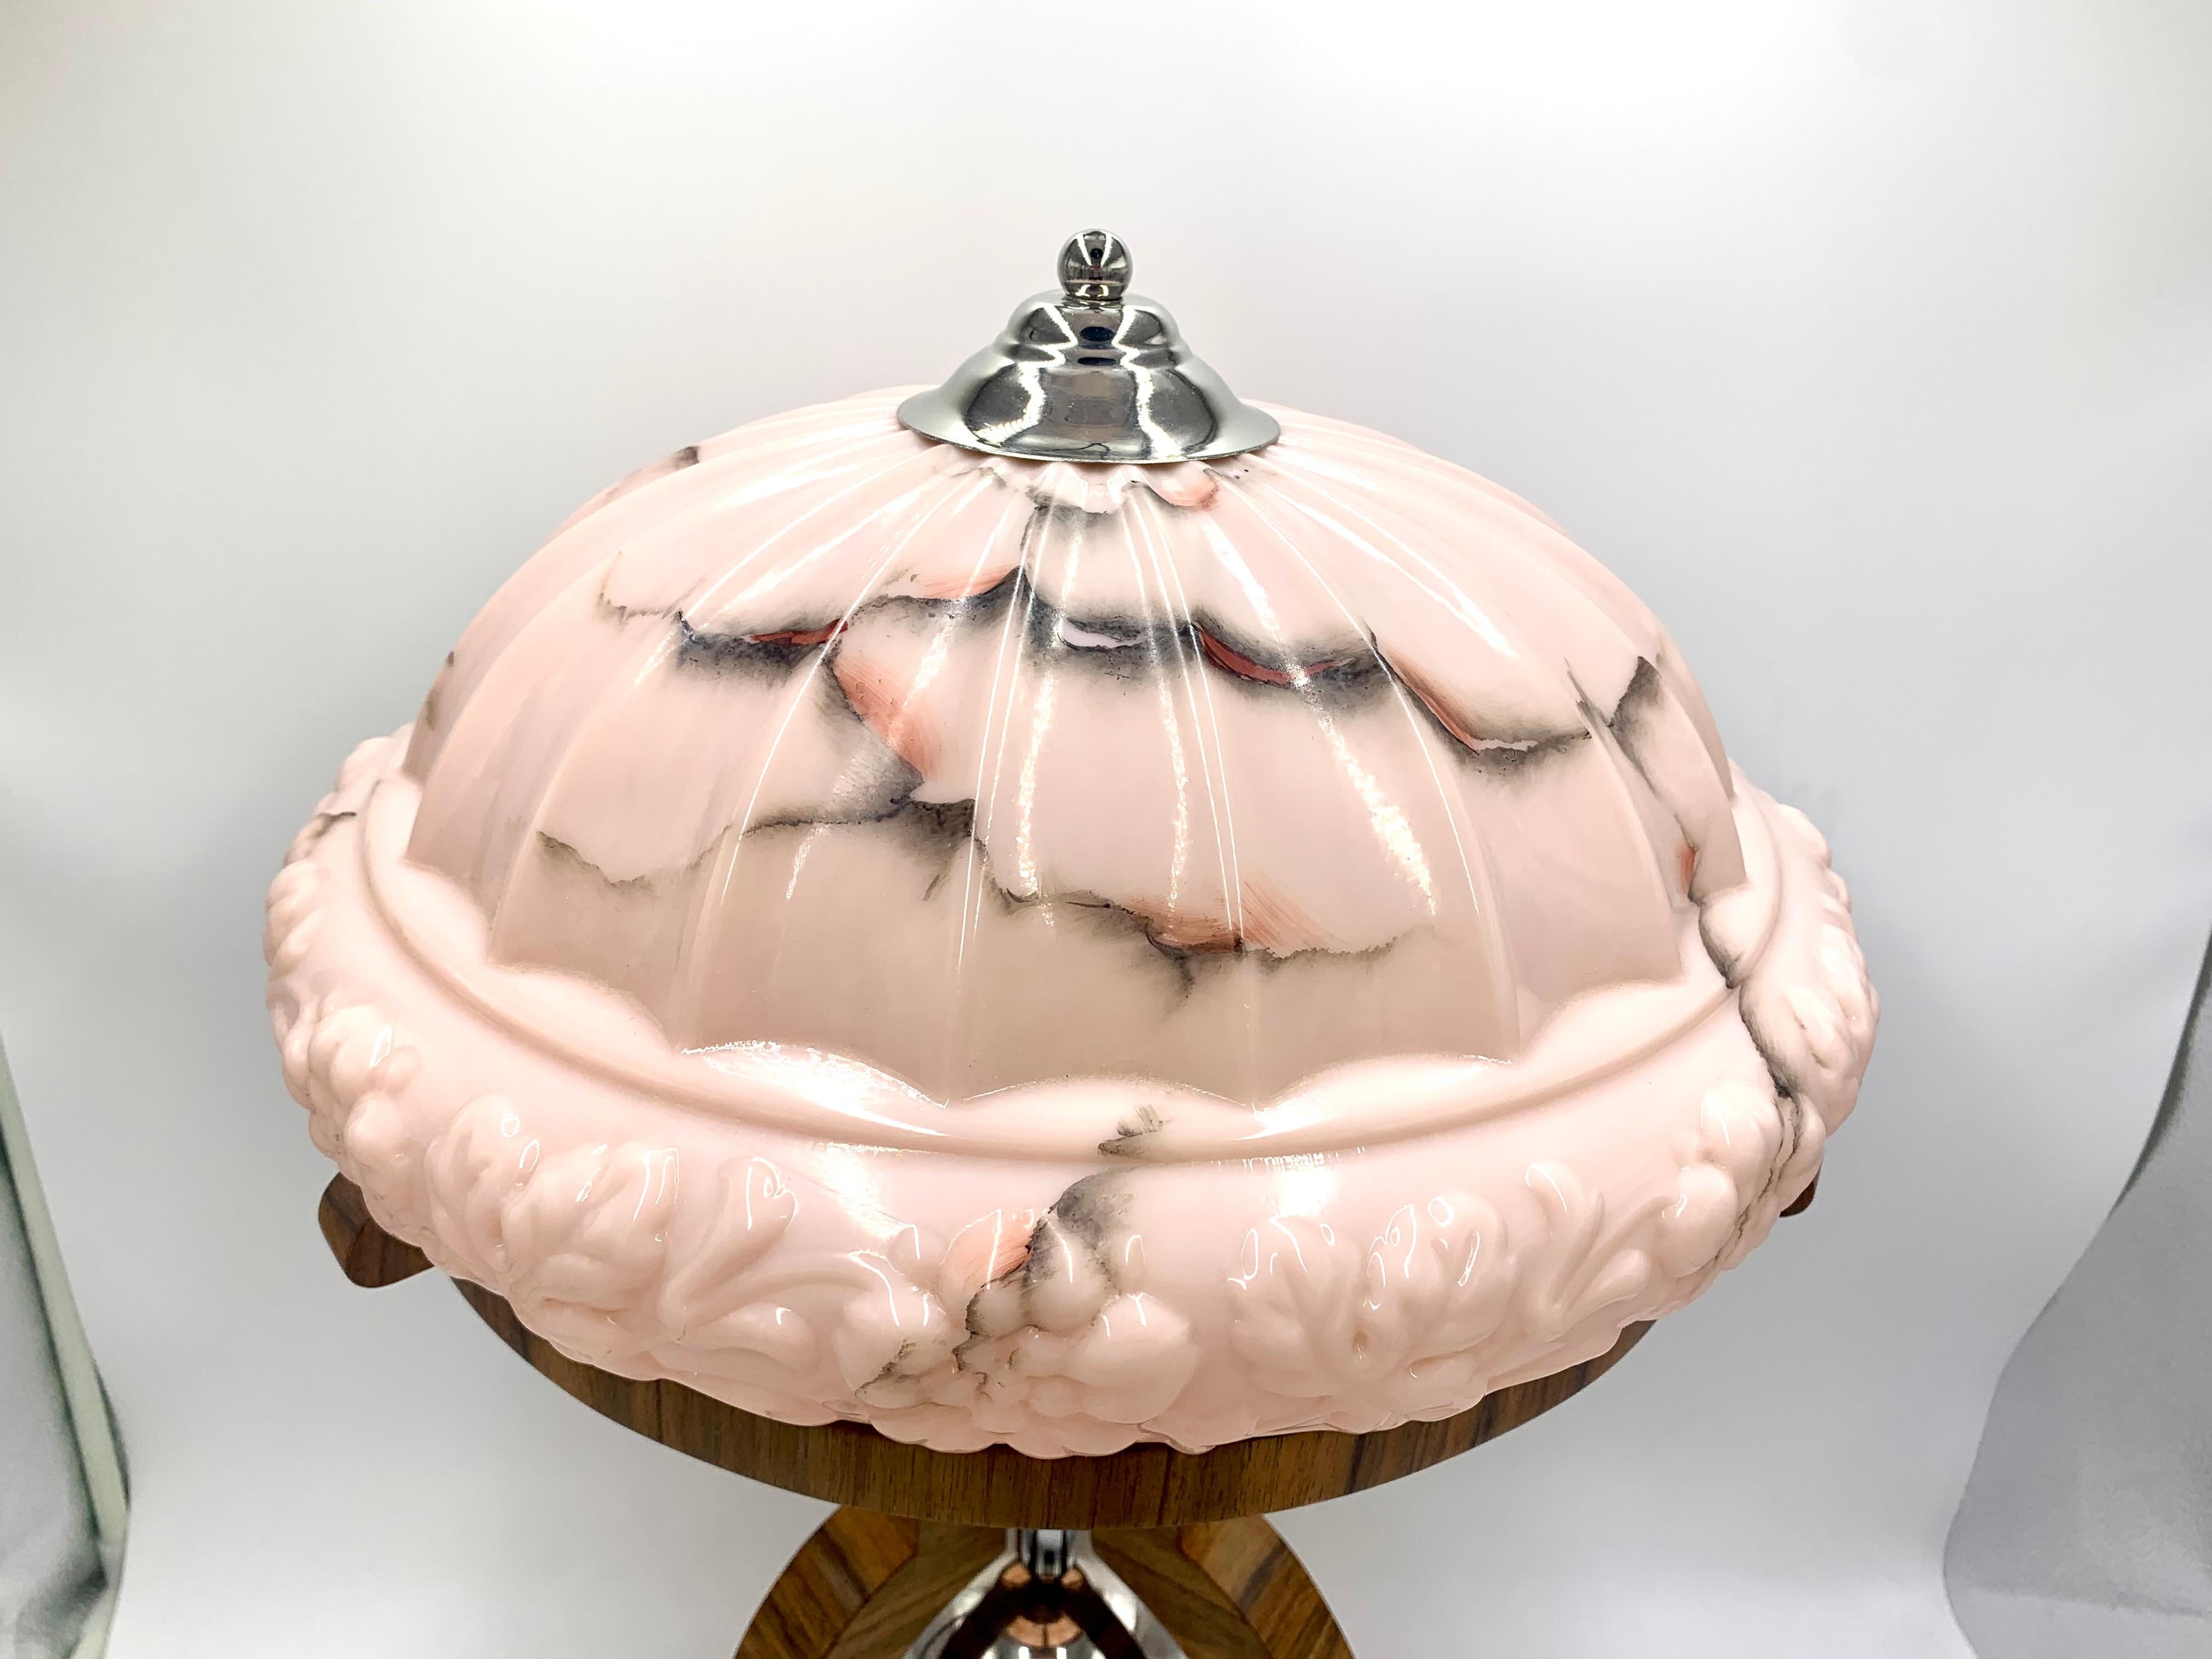 Art Deco table lamp with a large decorative pink shade.

Made in Poland in the 1950s.

The posture will be made of walnut wood finished in varnish.

New cable.

Very good condition.

Measures: Height: 61 cm diameter of the base: 20 cm